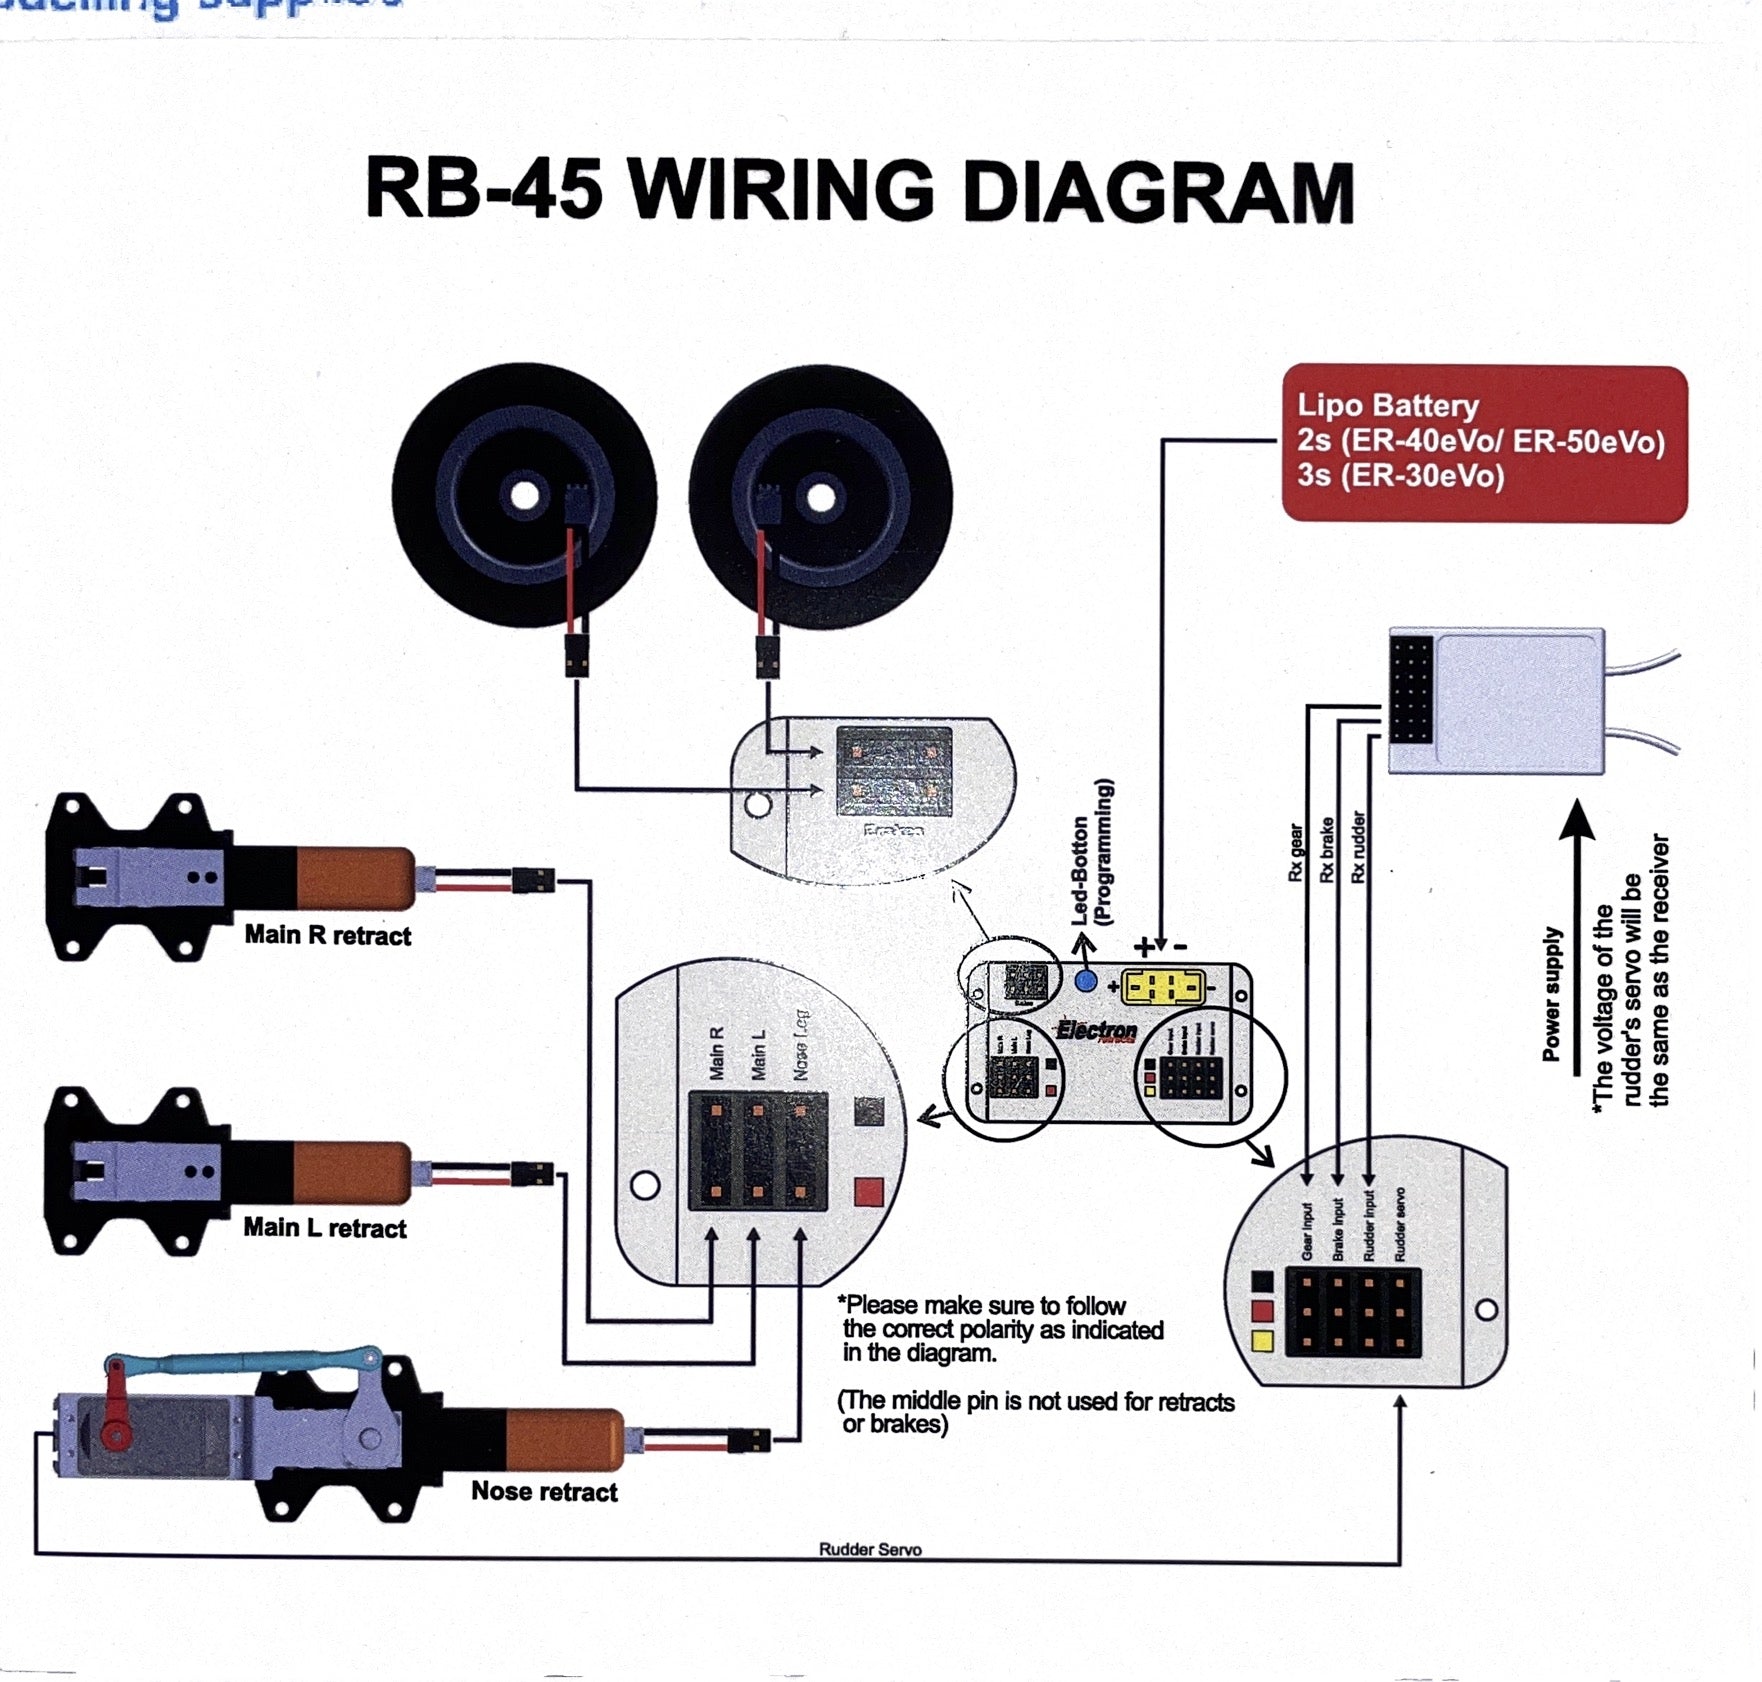 RB-45 Landing Gear Controller for ER30 from Electron Retracts RB45